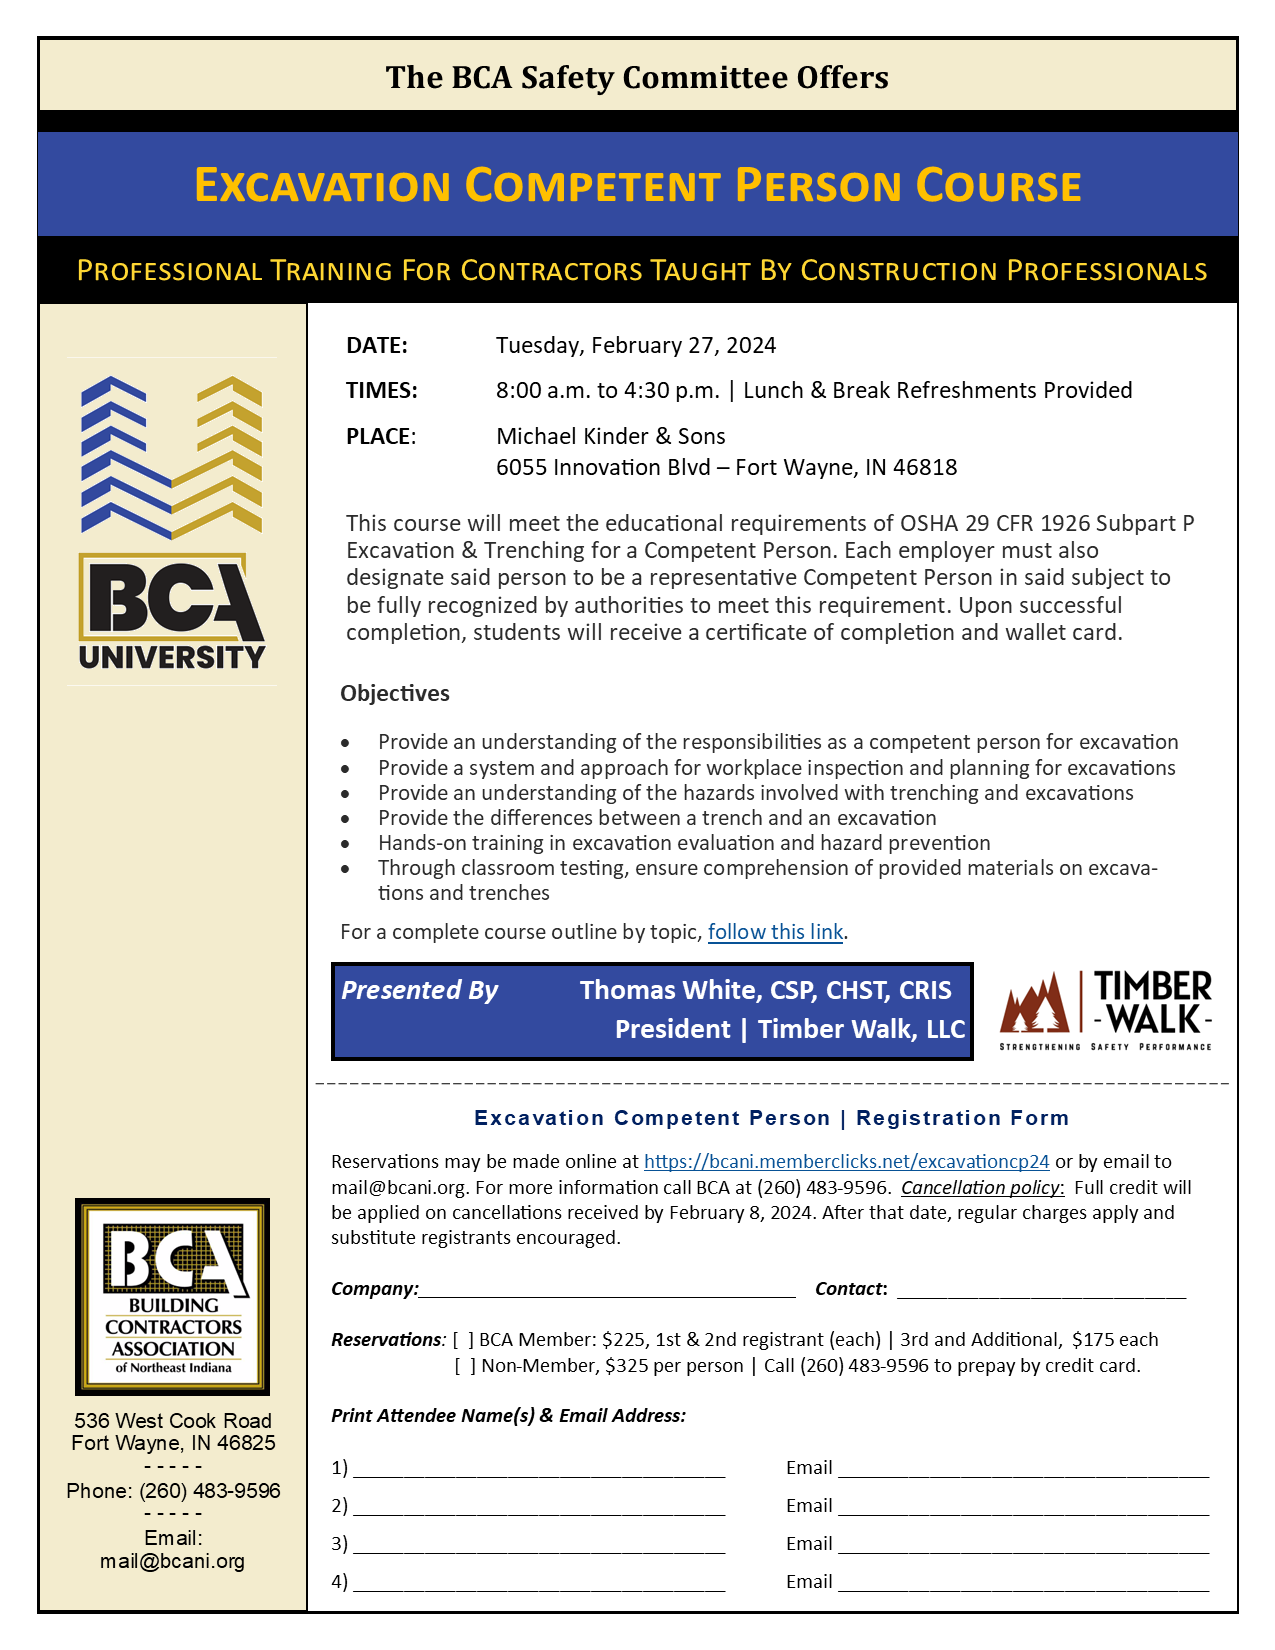 BCA Excavation Competent Person Training Class